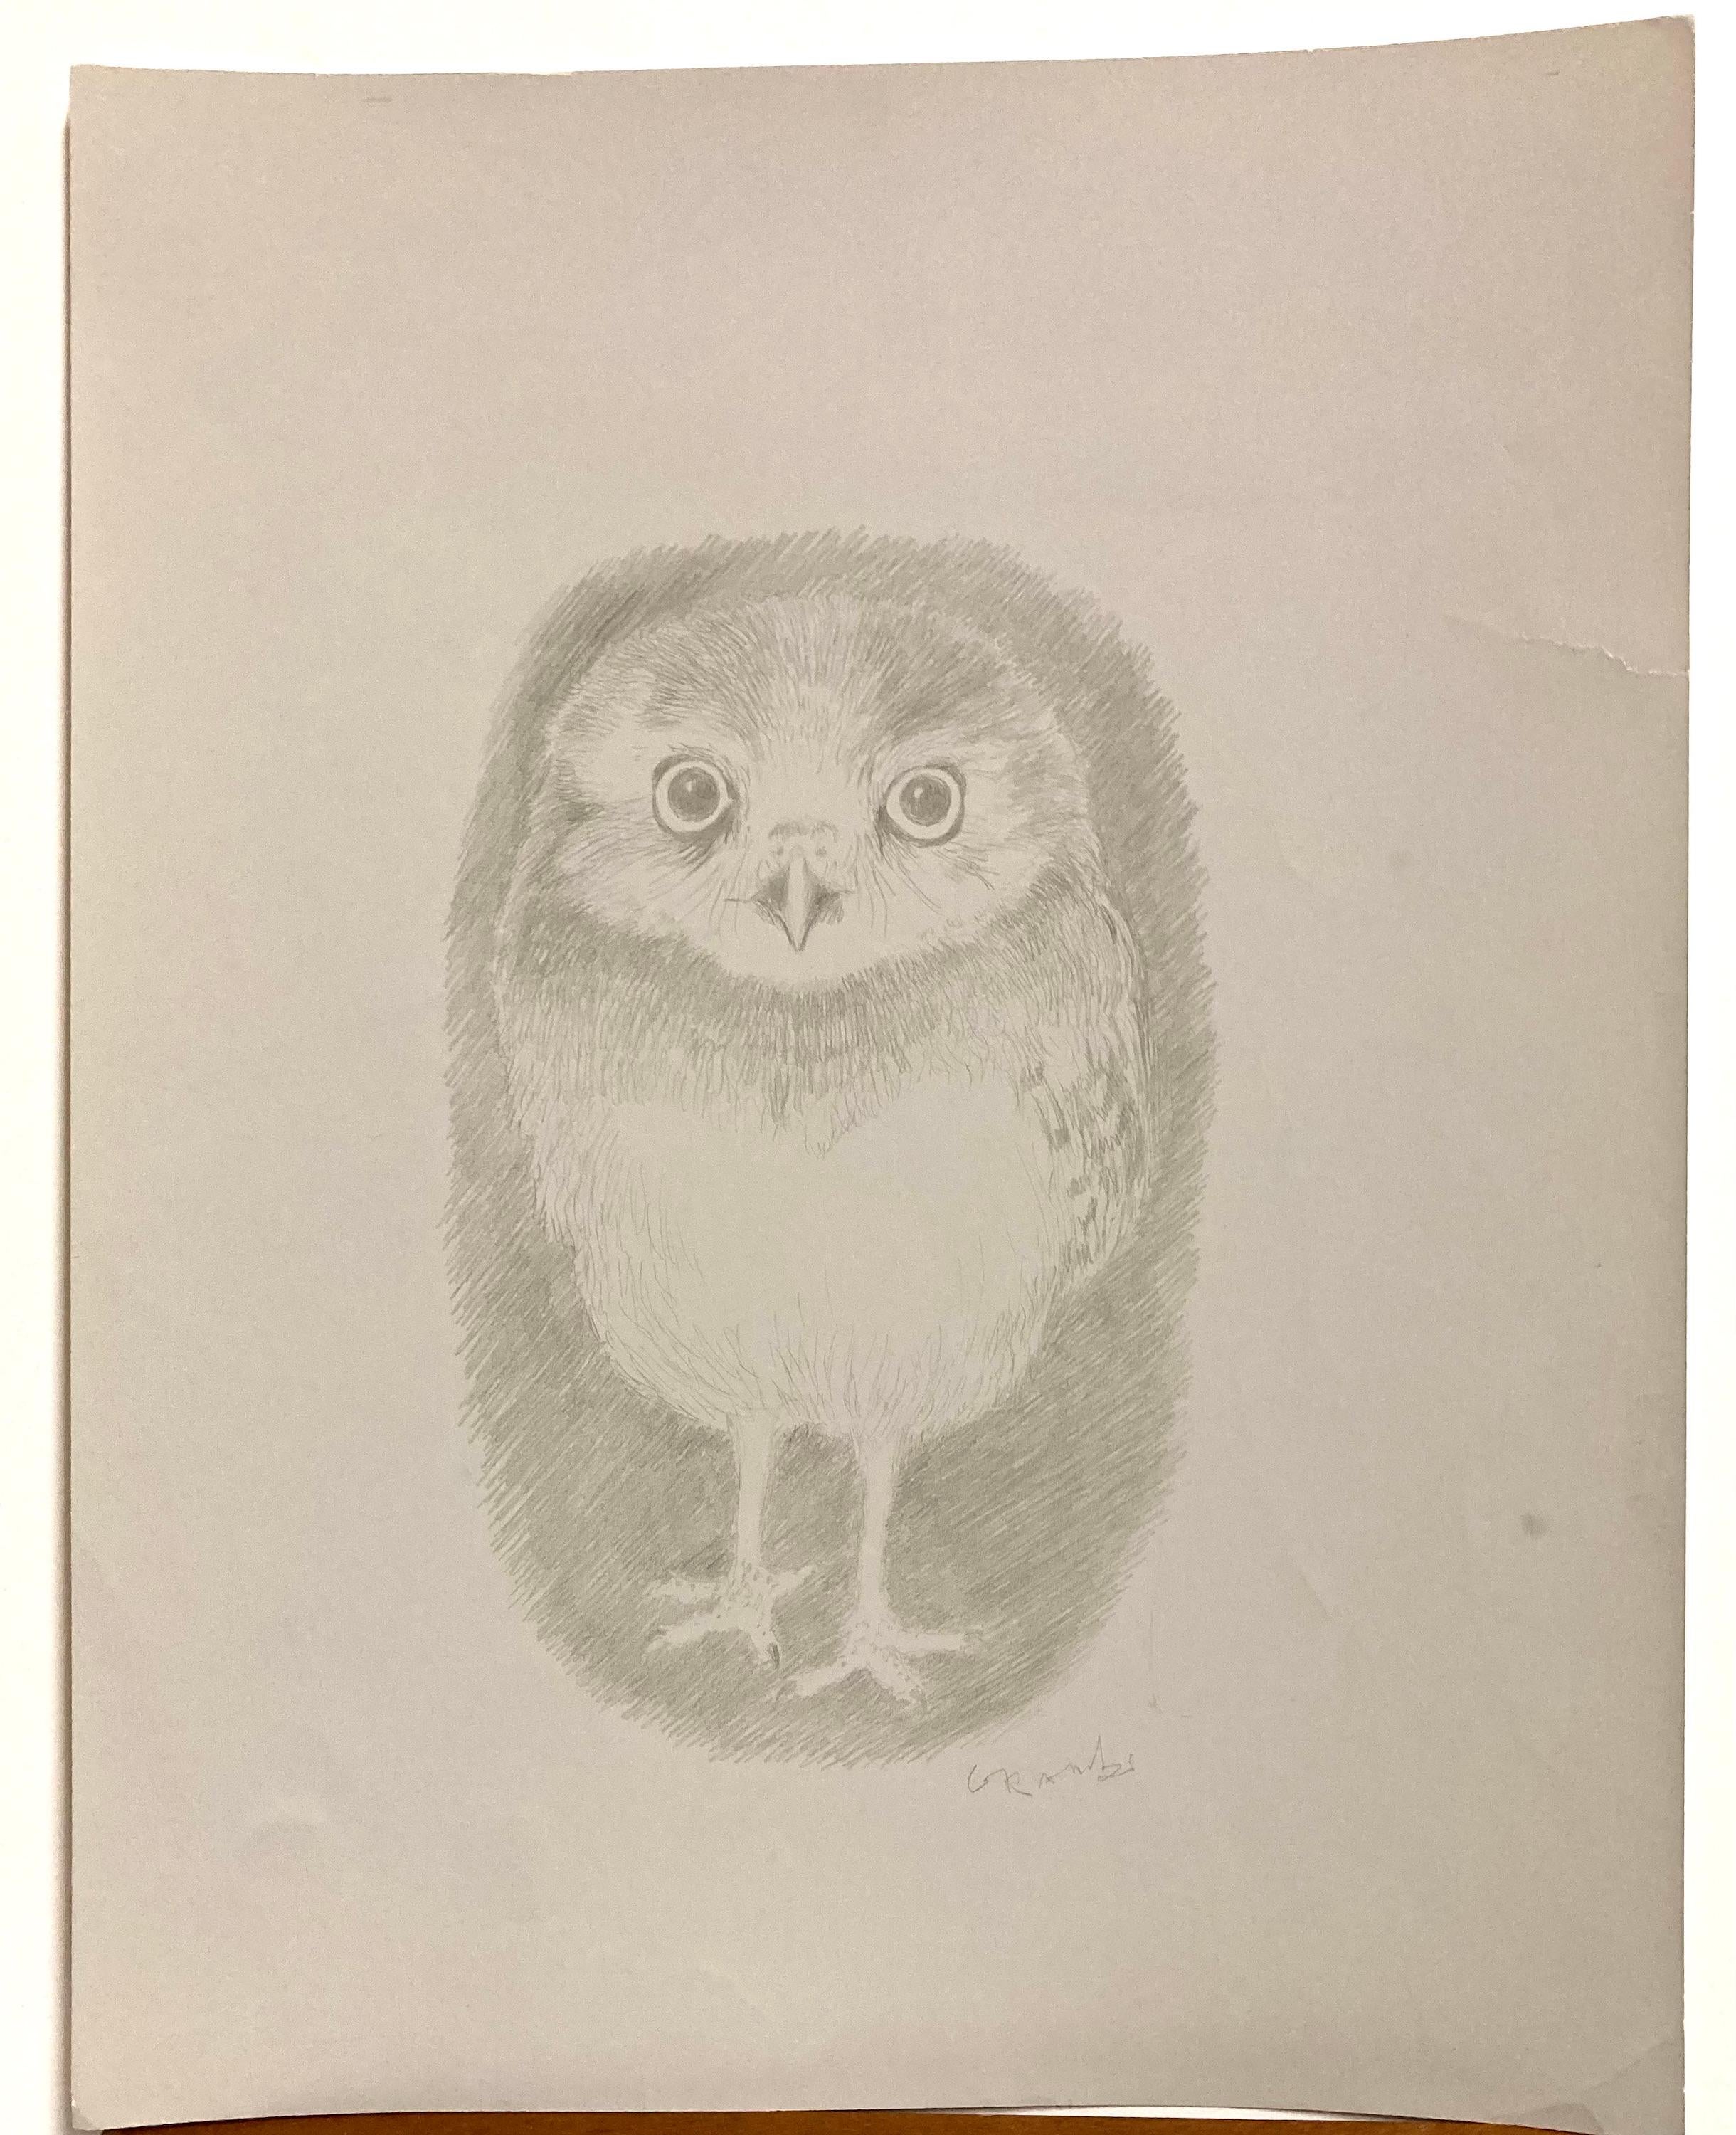 Blanche Grambs, (Young Owl)